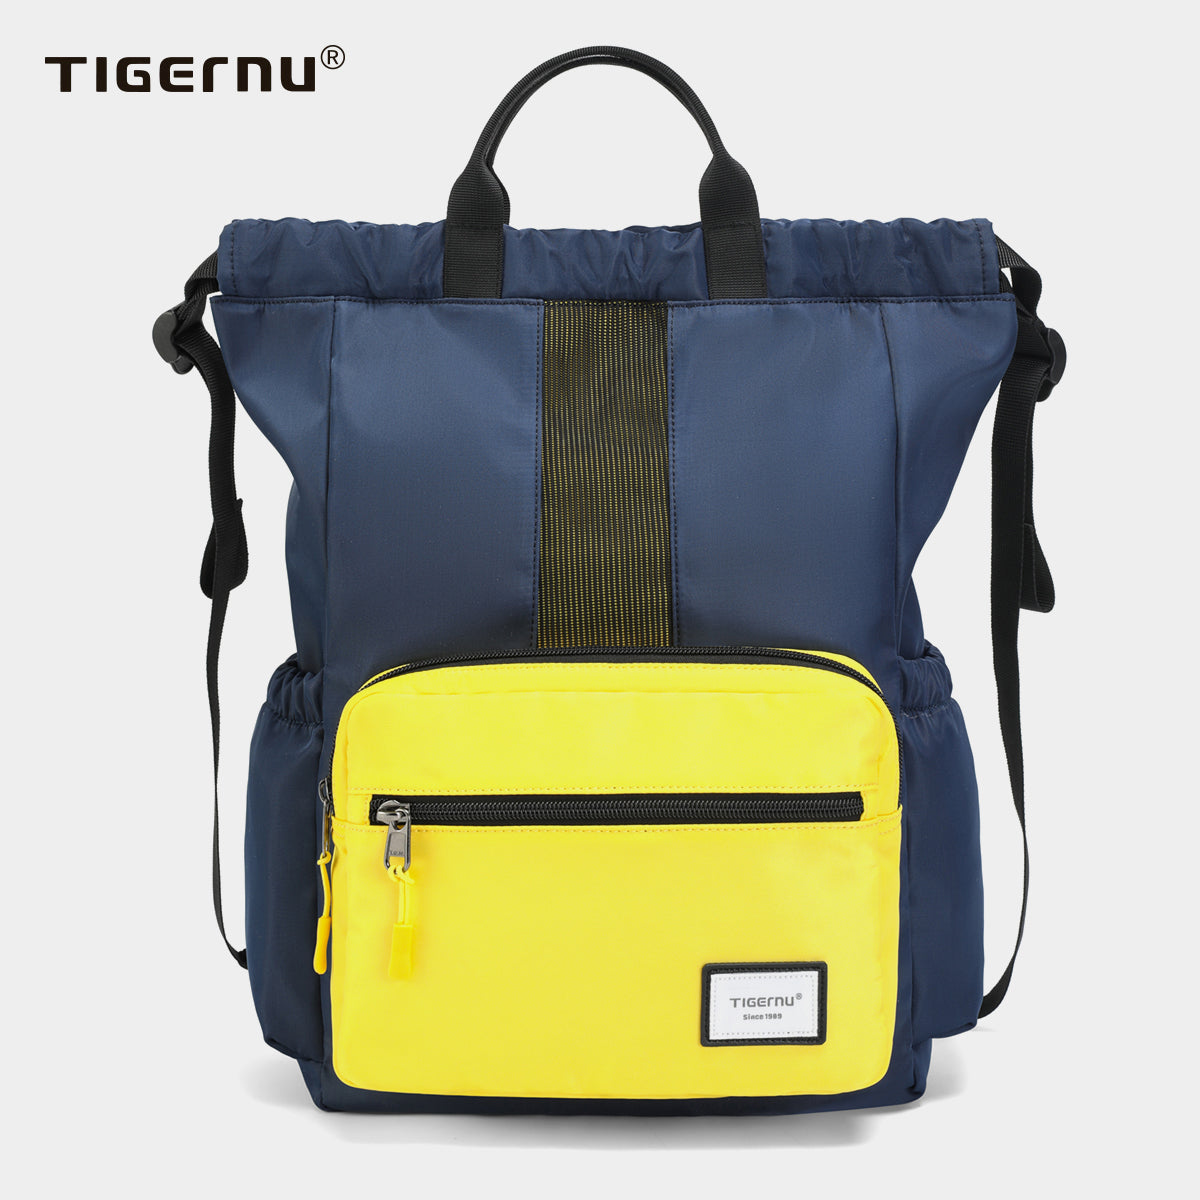 Tigernu T-S8511 new design trending 14 inches sport outdoor laptop drawstring backpack for boy girls